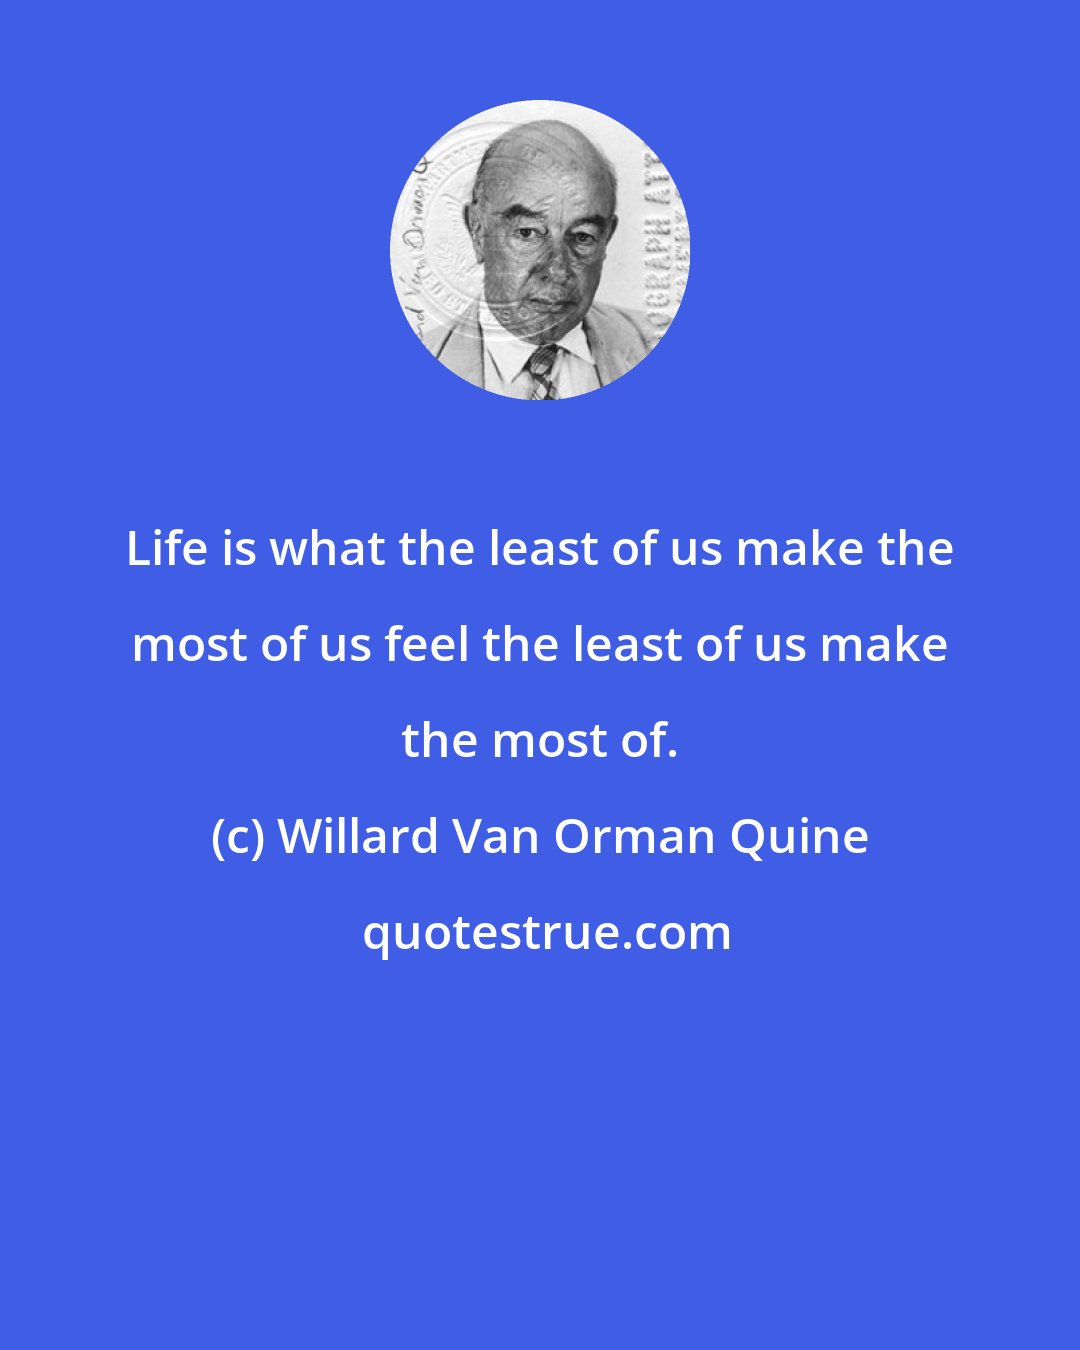 Willard Van Orman Quine: Life is what the least of us make the most of us feel the least of us make the most of.